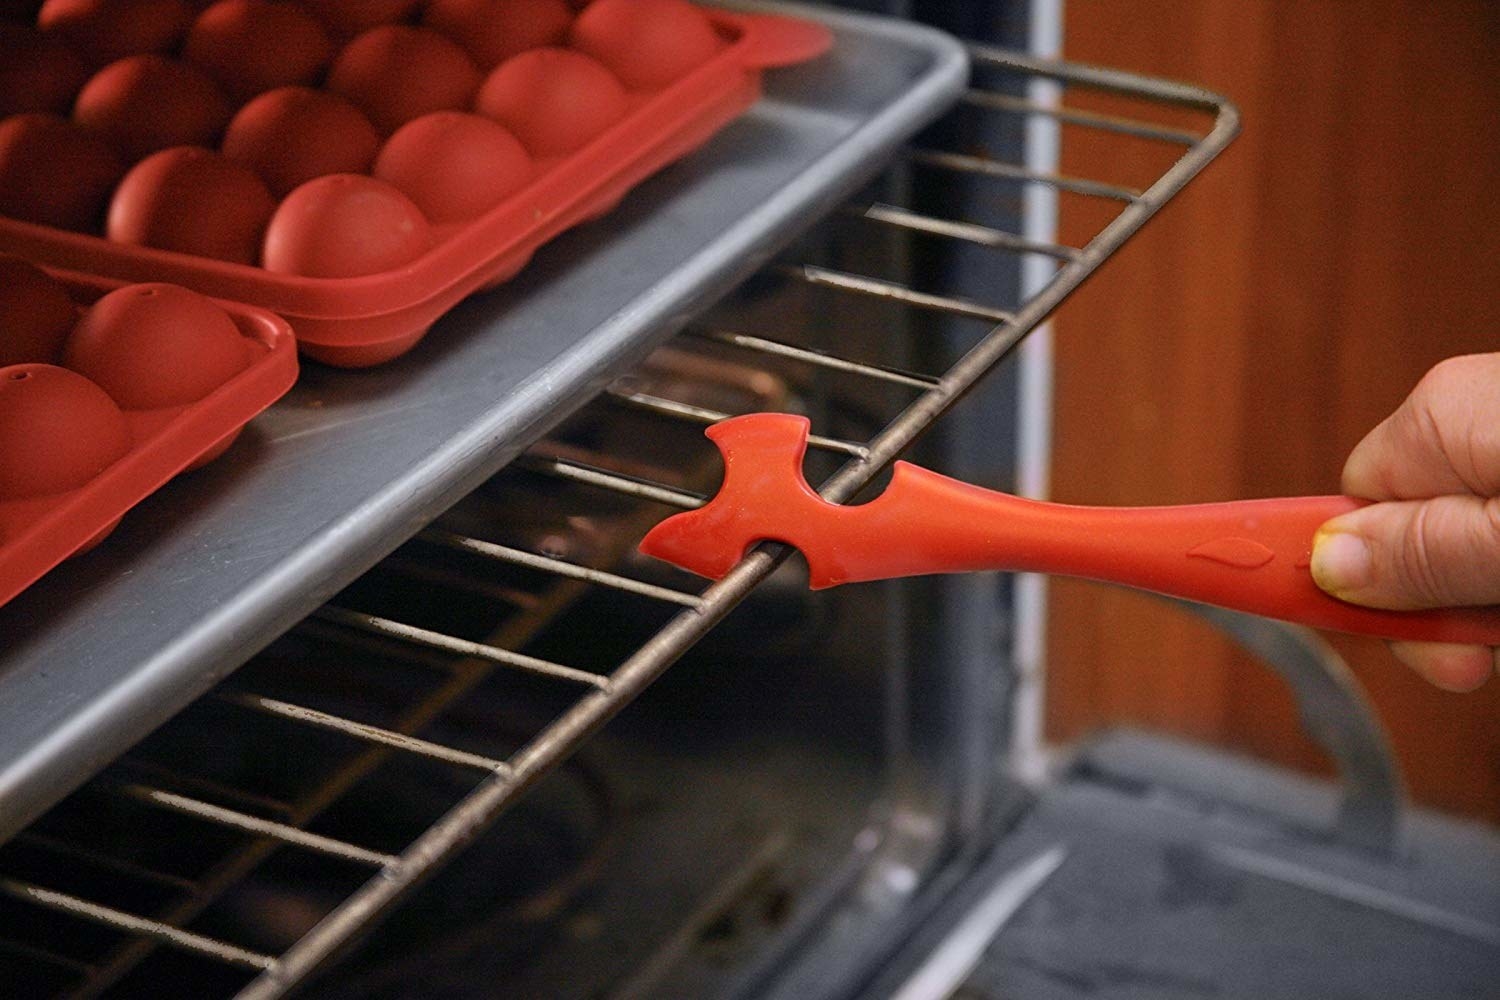 A person pulling an oven rack out using a small silicone hook with a long handle